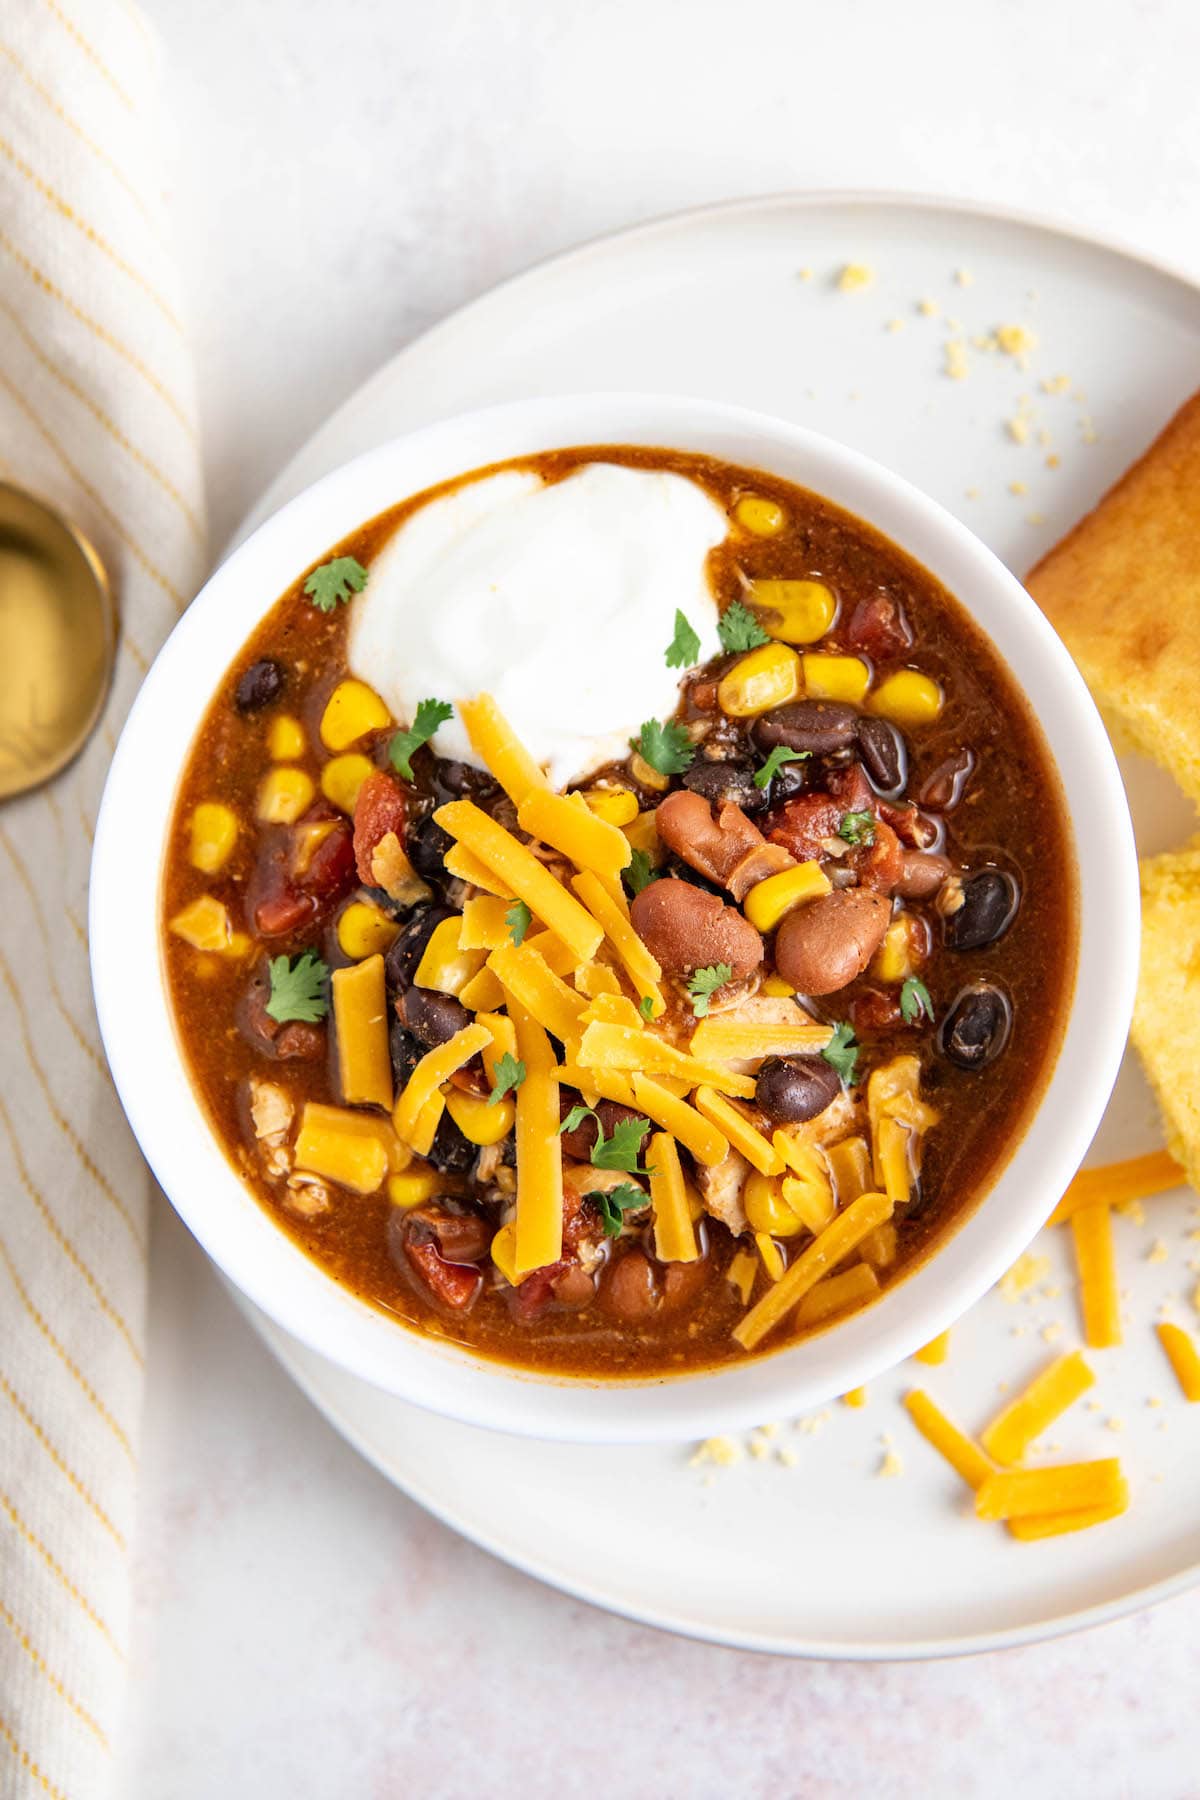 Overhead view of a bowl of chicken chili topped with cheese and sour cream, on a plate with cornbread.